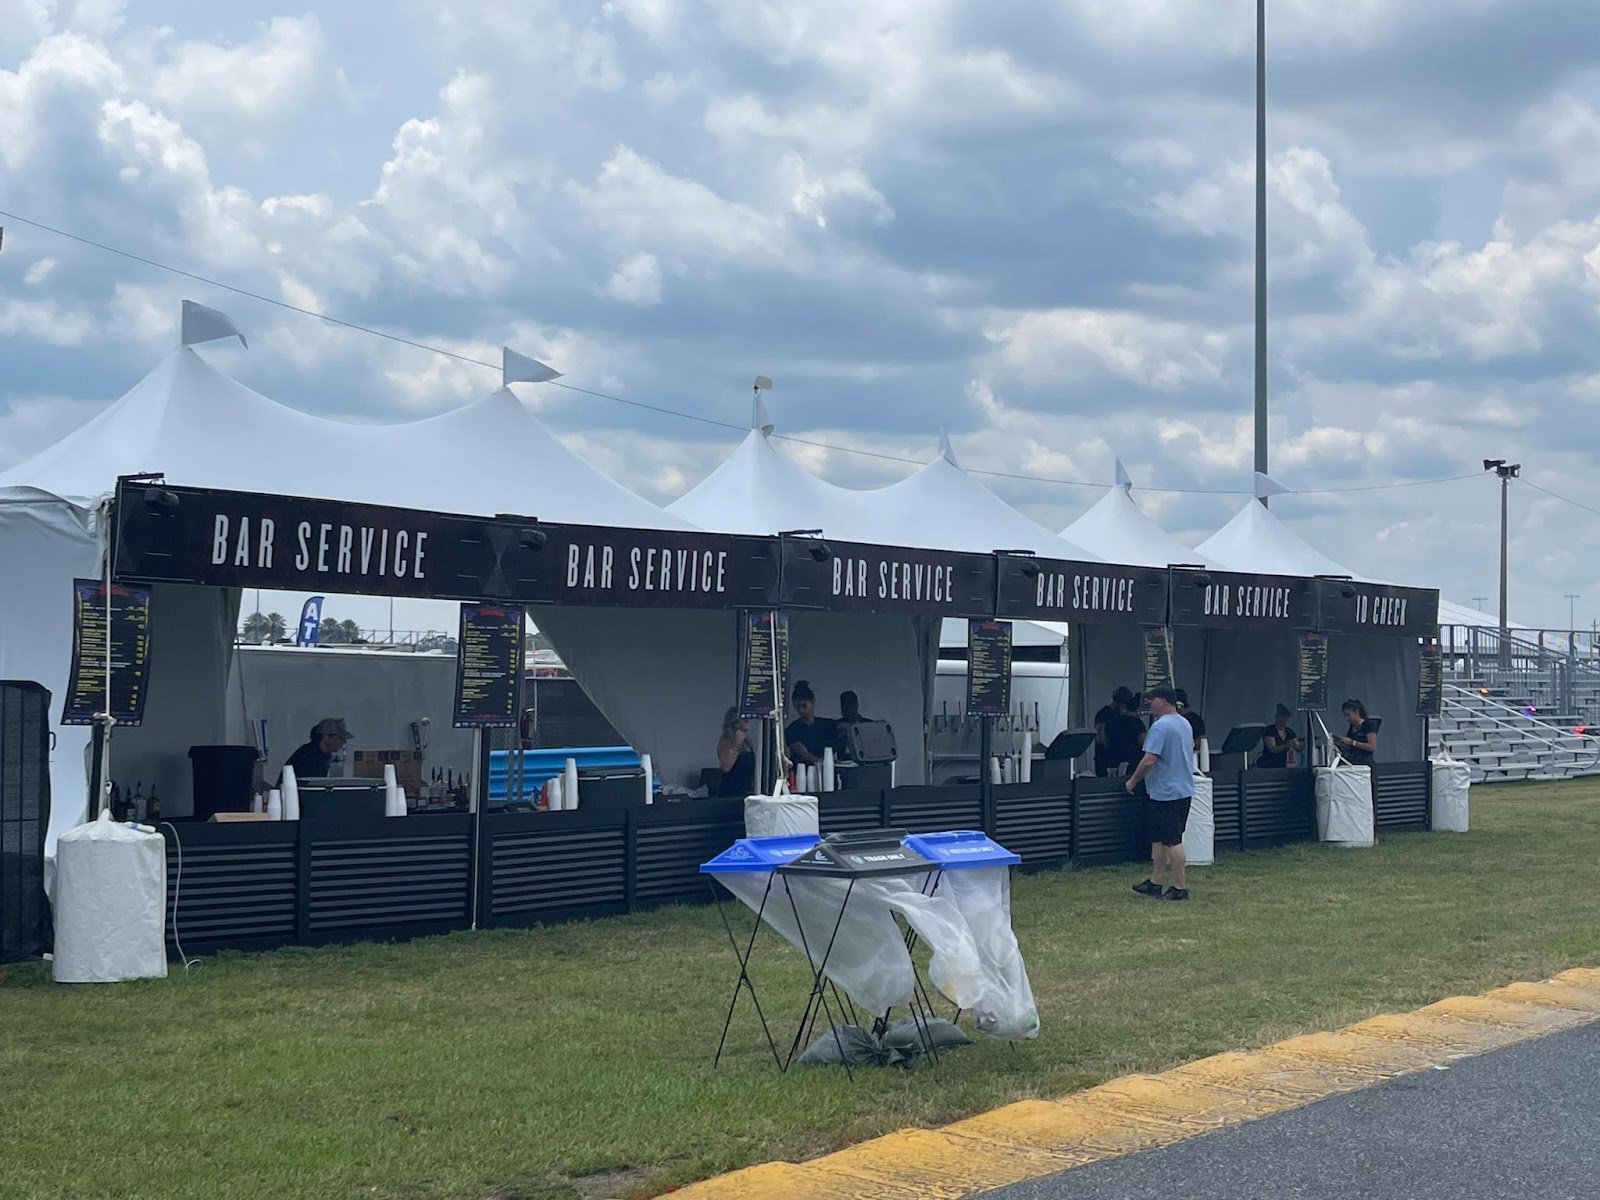 bar service tents at Welcome to Rockville at the Daytona International Speedway